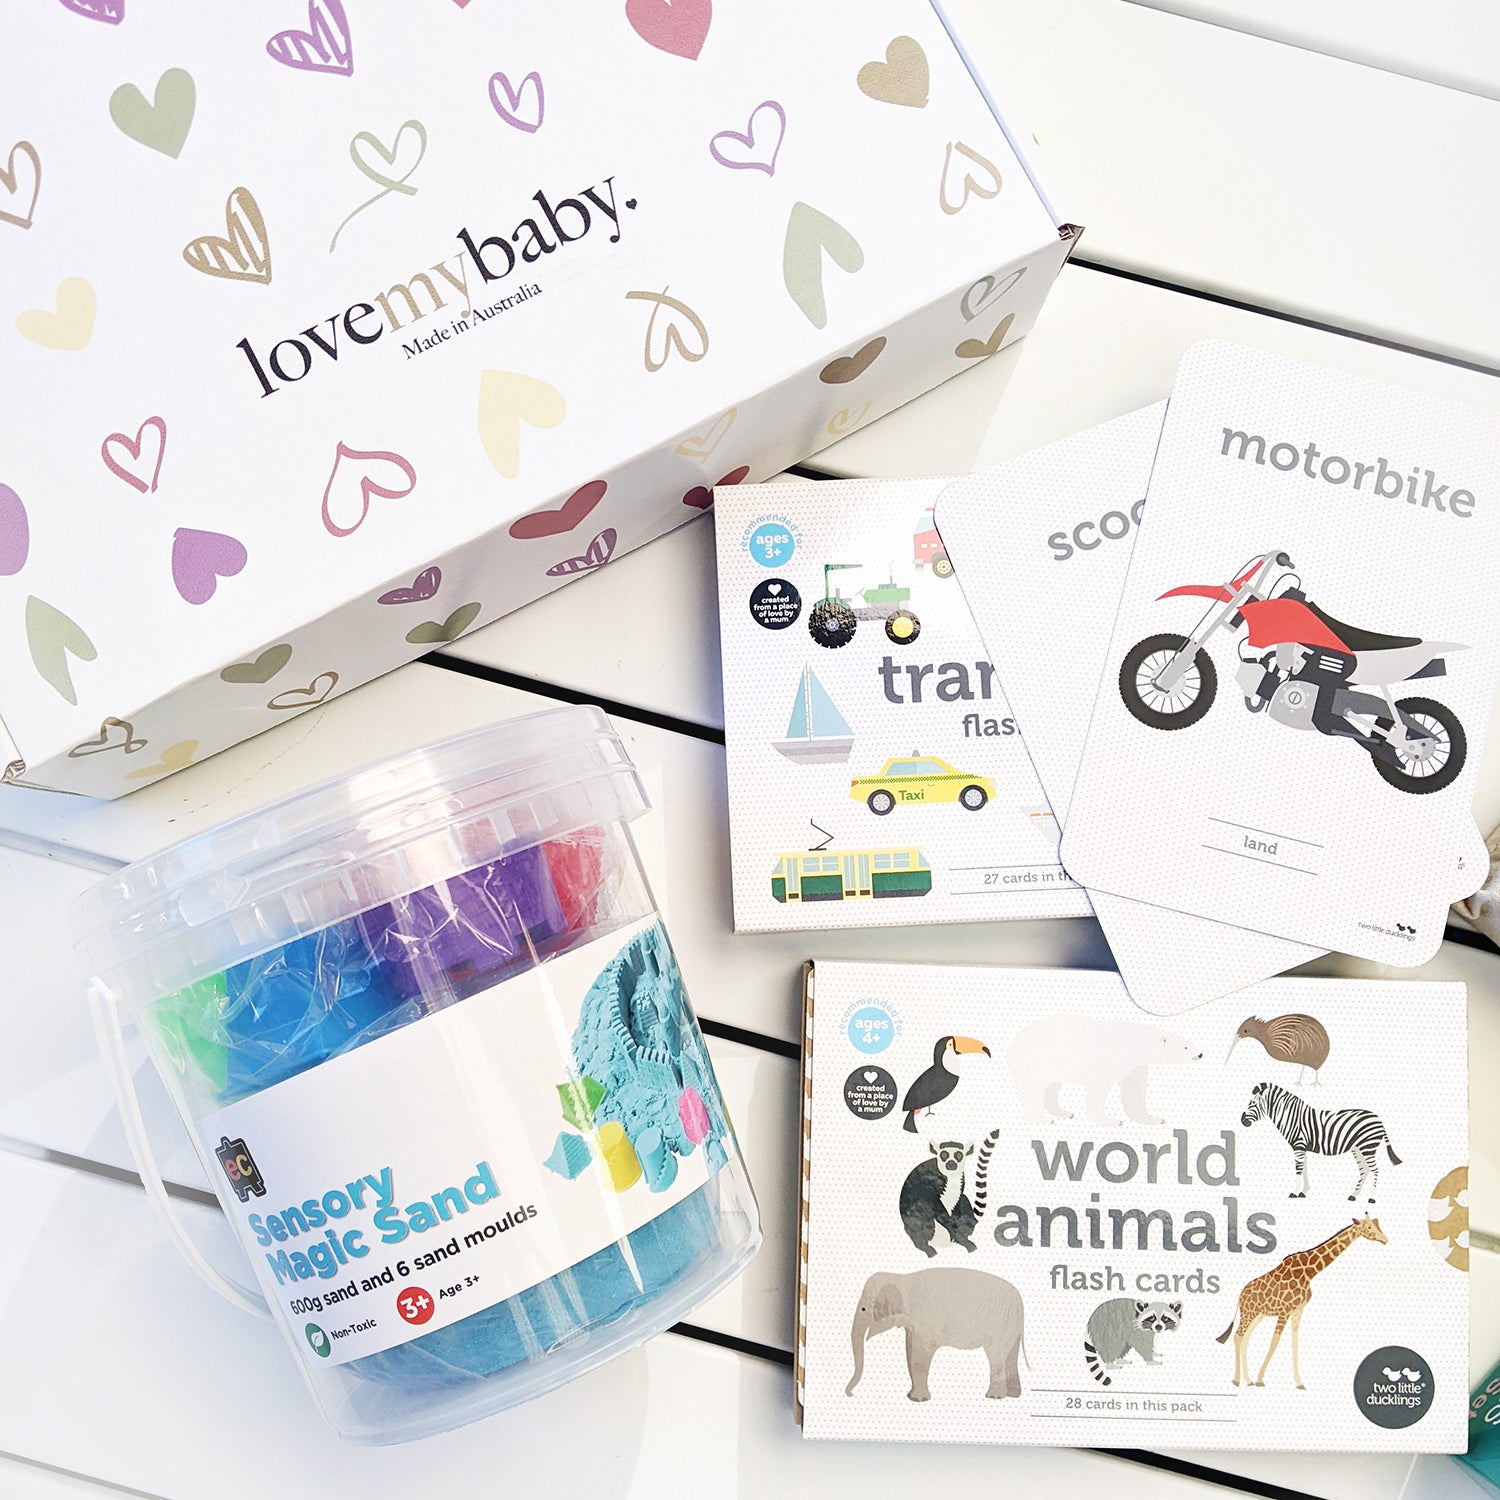 Play & Craft Gift box - Dustless chalk, paint set, sensory sand, transport flash card, world animals flash cards, and Australian animals heads and tails game